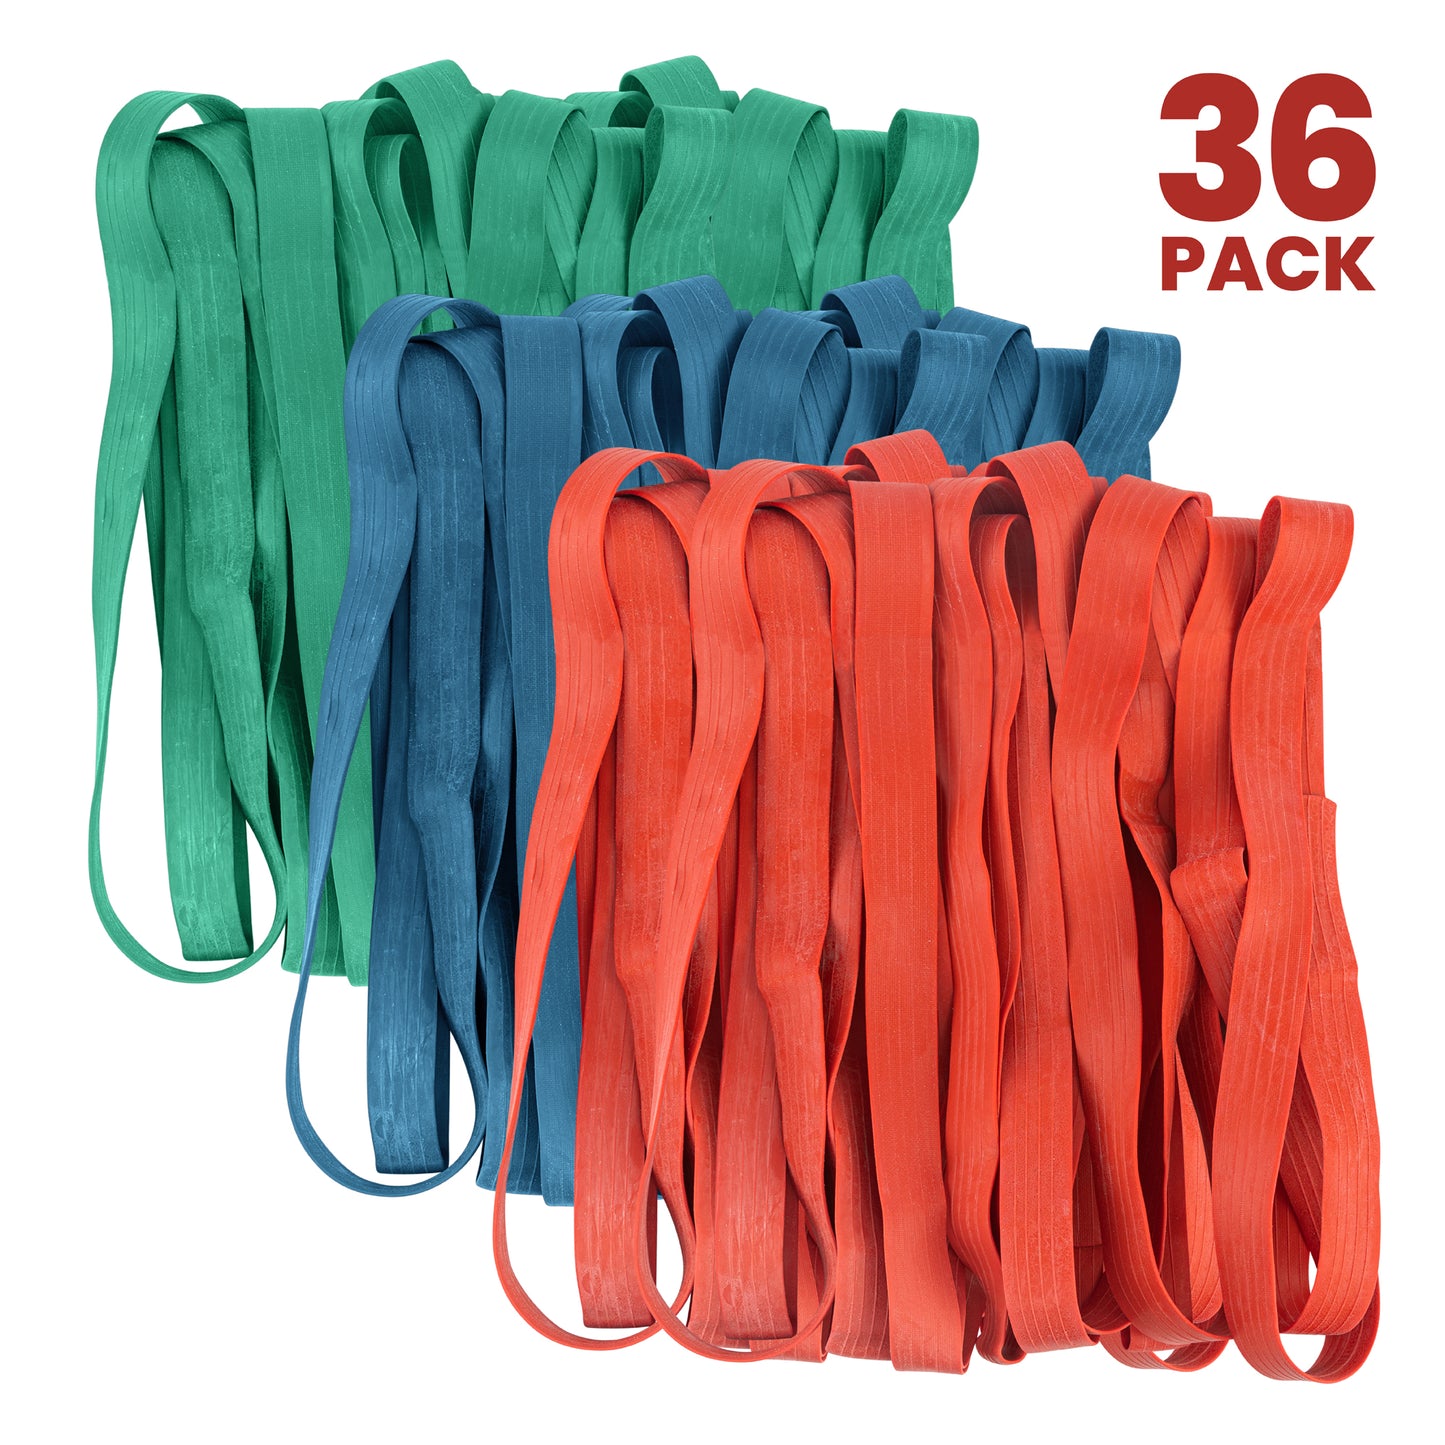 Furniture Mover Rubber Bands - Variety Pack